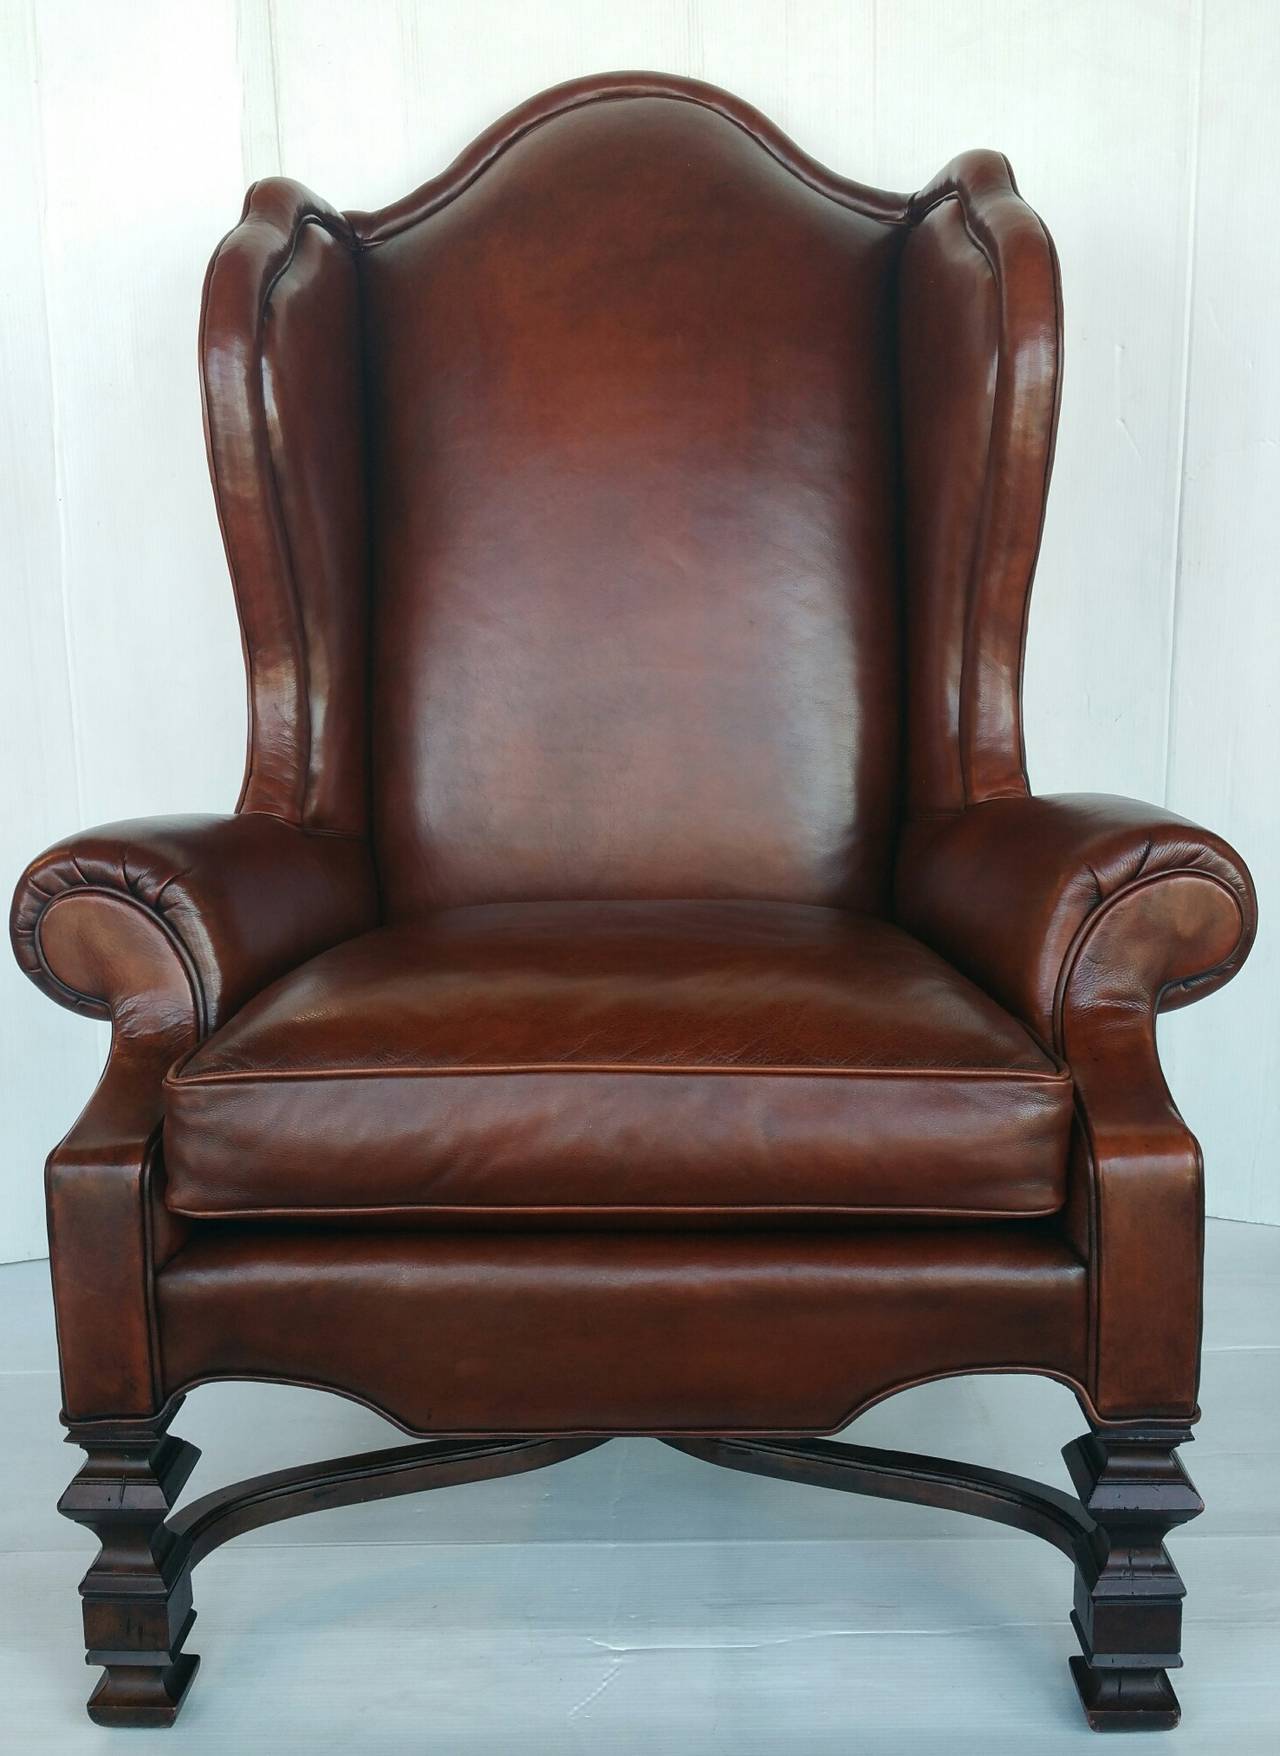 Pair of wingback chairs.